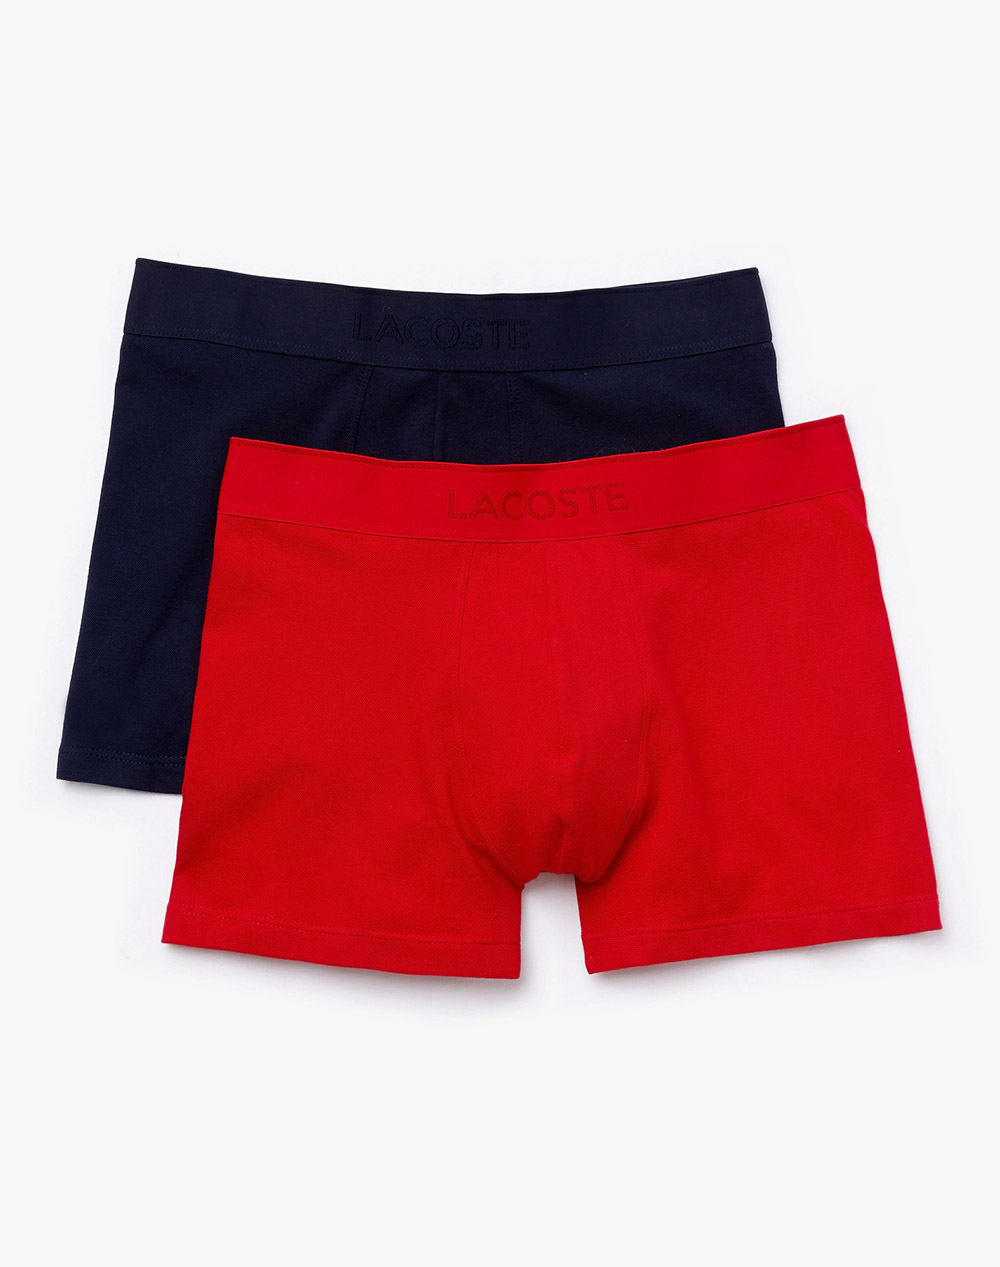 LACOSTE SET OF 2 TRUNKS TRUNK PACK 2